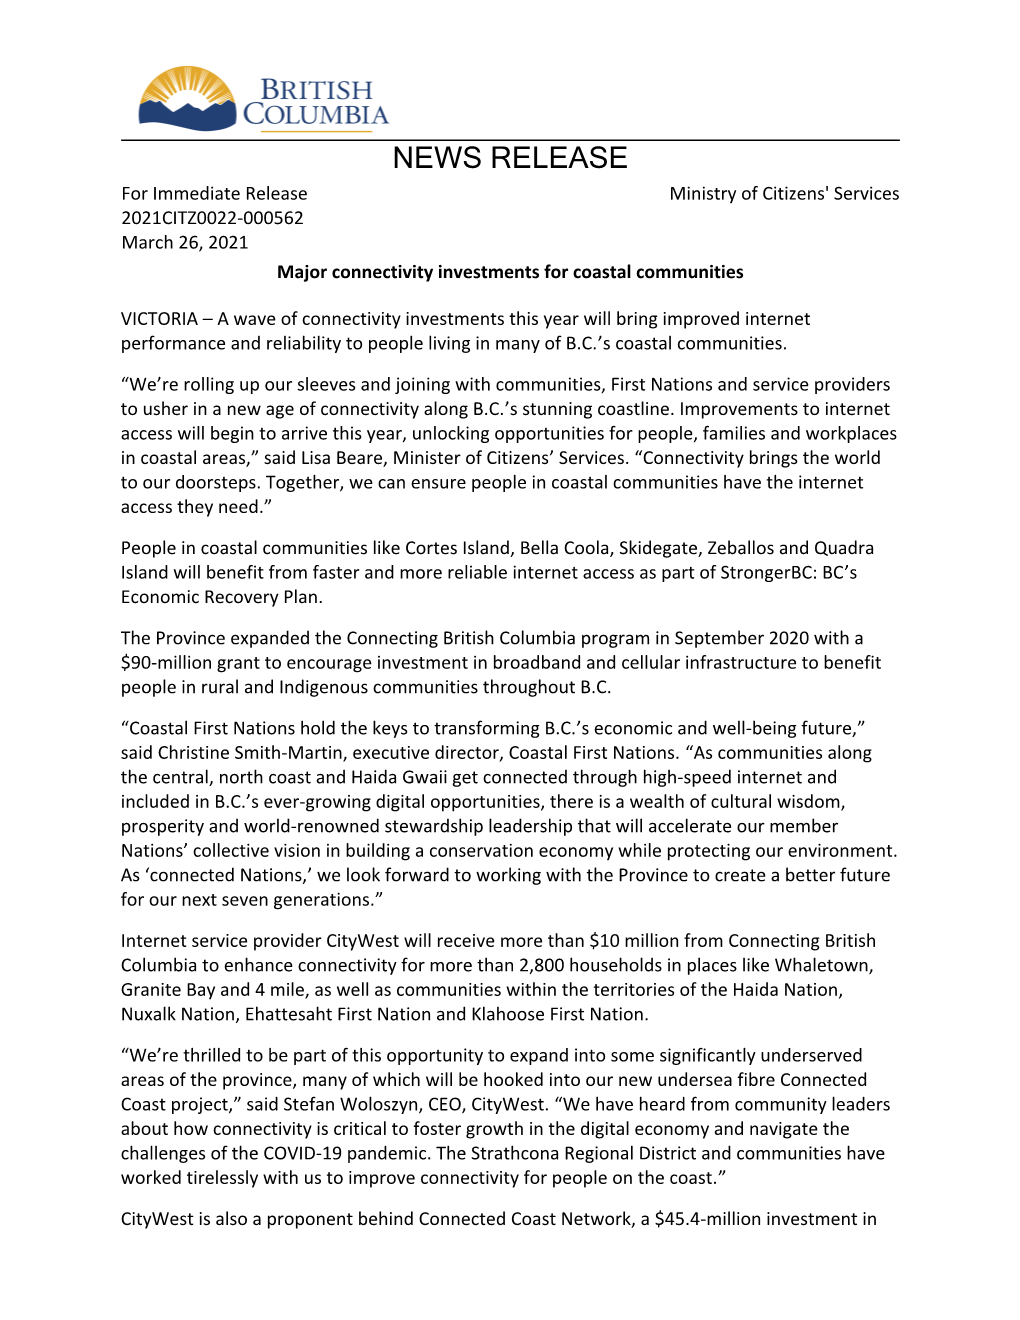 NEWS RELEASE for Immediate Release Ministry of Citizens' Services 2021CITZ0022-000562 March 26, 2021 Major Connectivity Investments for Coastal Communities